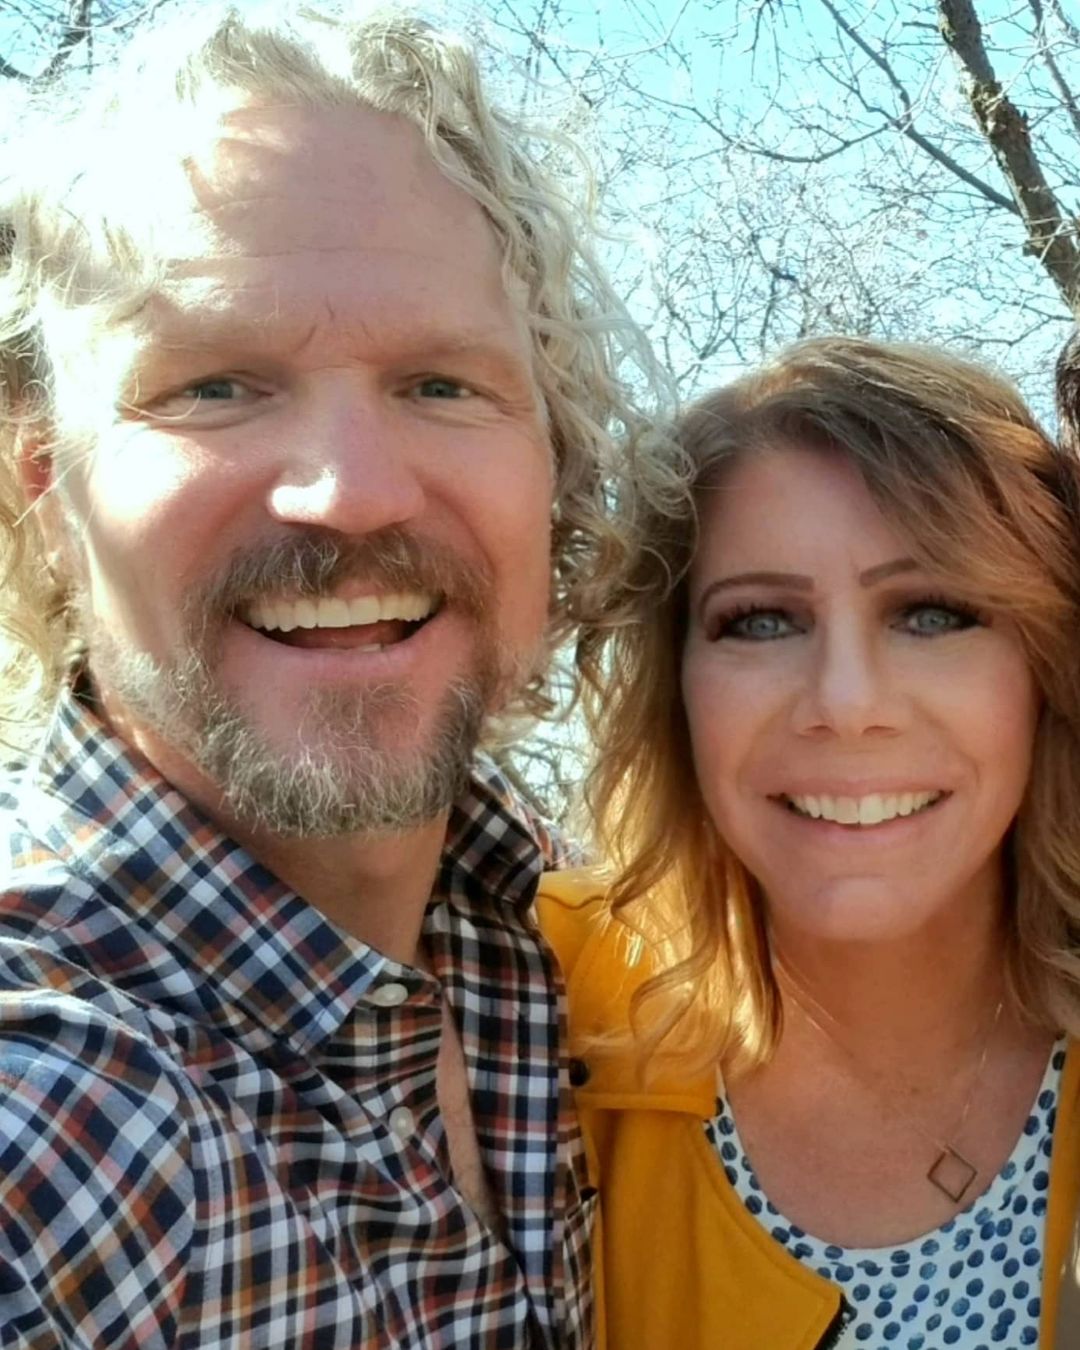 The Sister Wives patriarch claimed their marriage was in trouble for years prior